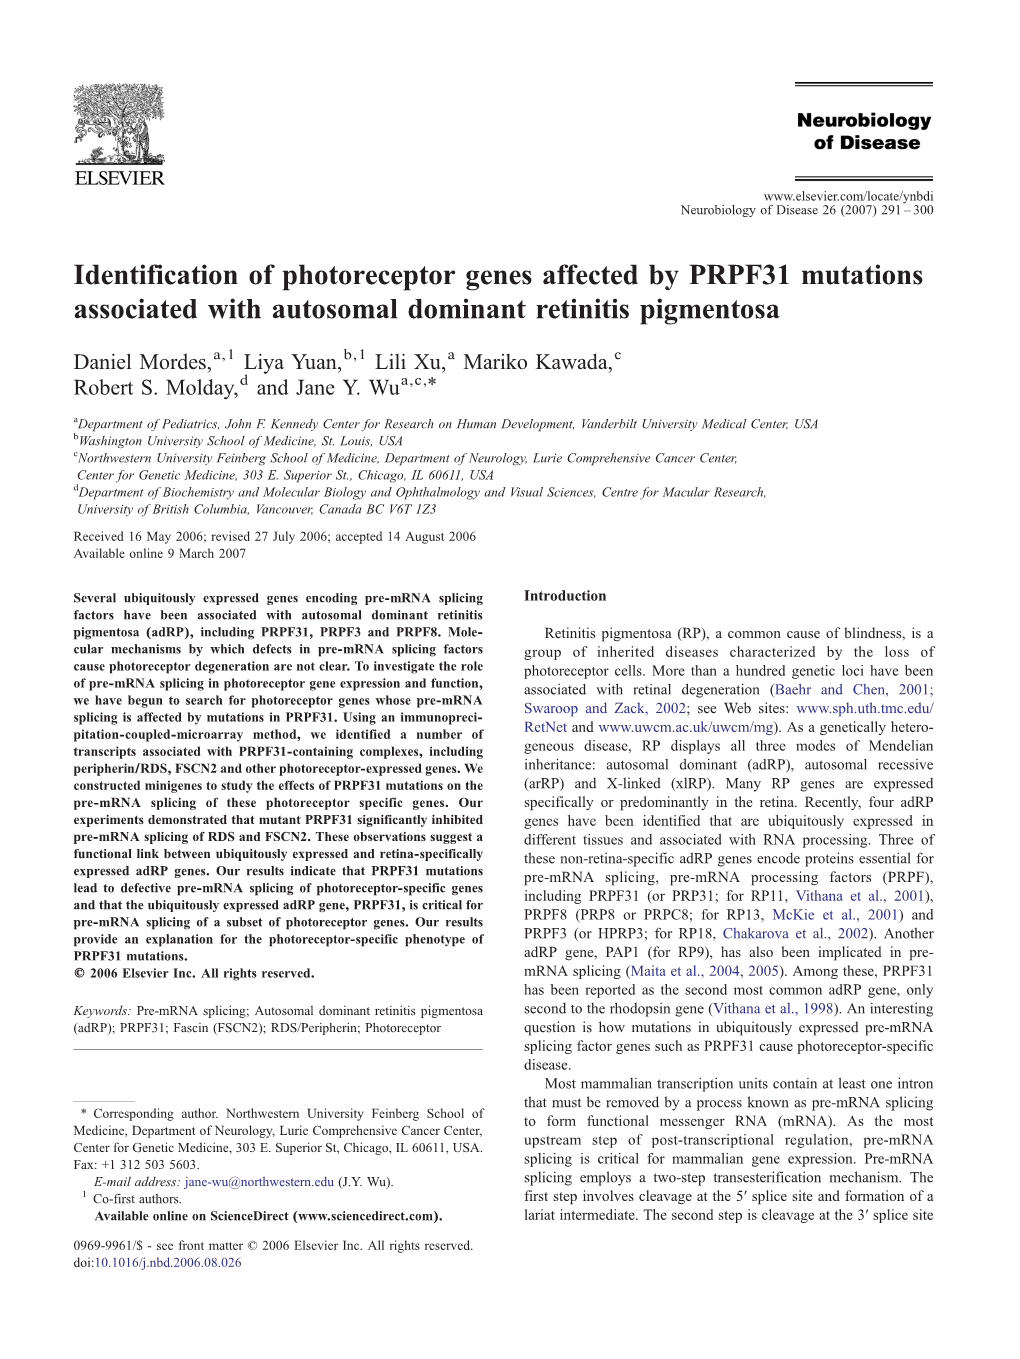 Identification of Photoreceptor Genes Affected by PRPF31 Mutations Associated with Autosomal Dominant Retinitis Pigmentosa